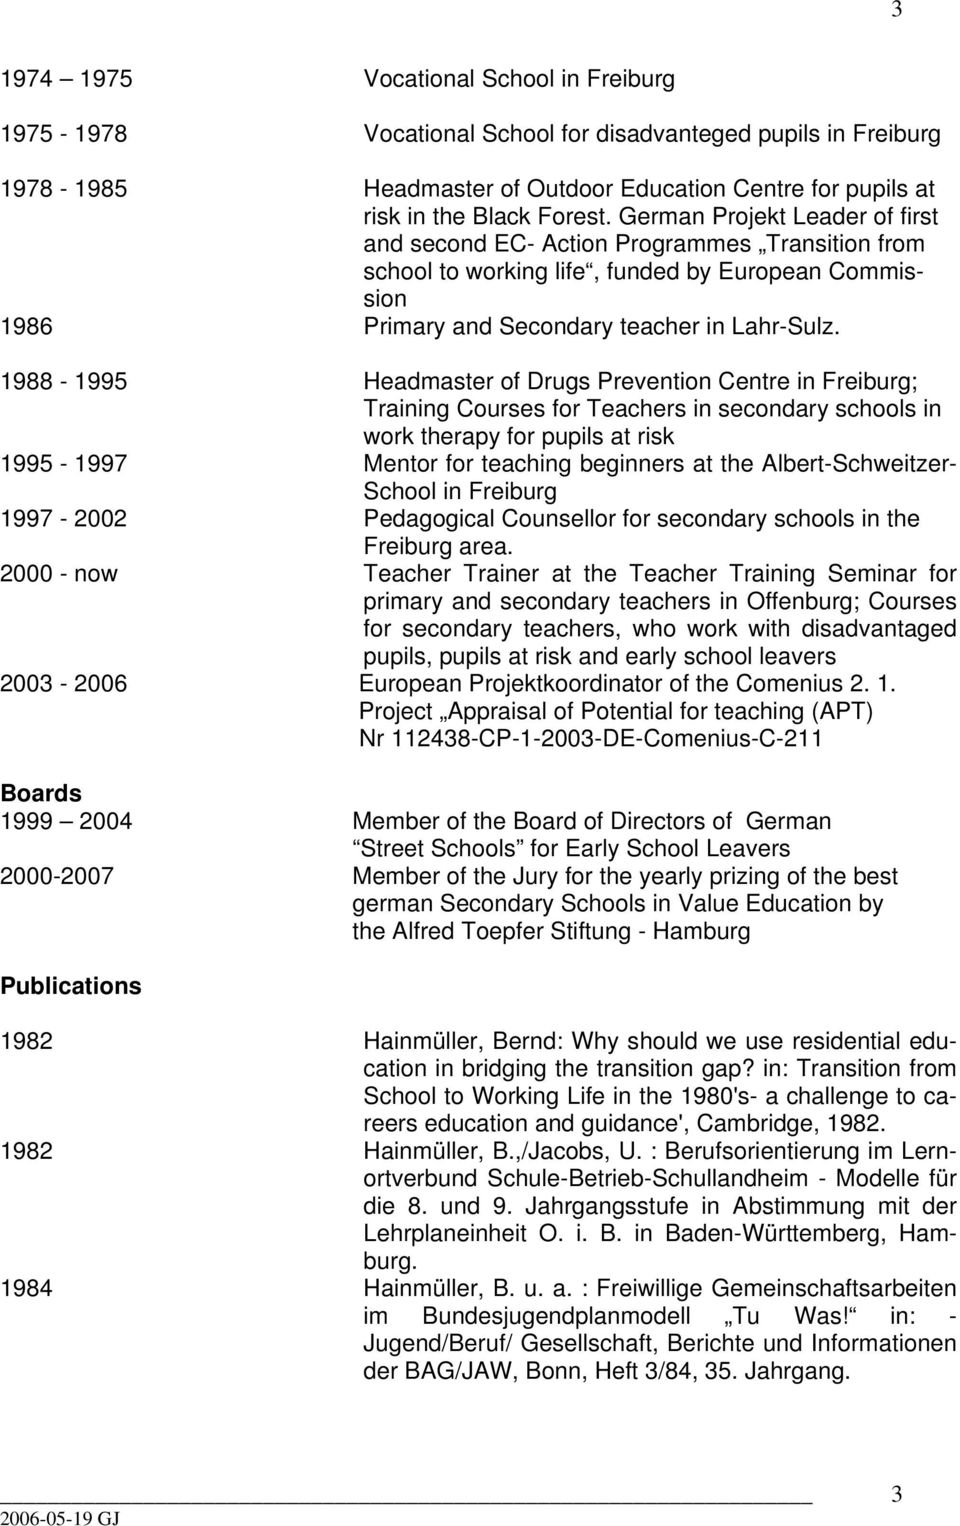 1988-1995 Headmaster of Drugs Prevention Centre in Freiburg; Training Courses for Teachers in secondary schools in work therapy for pupils at risk 1995-1997 Mentor for teaching beginners at the